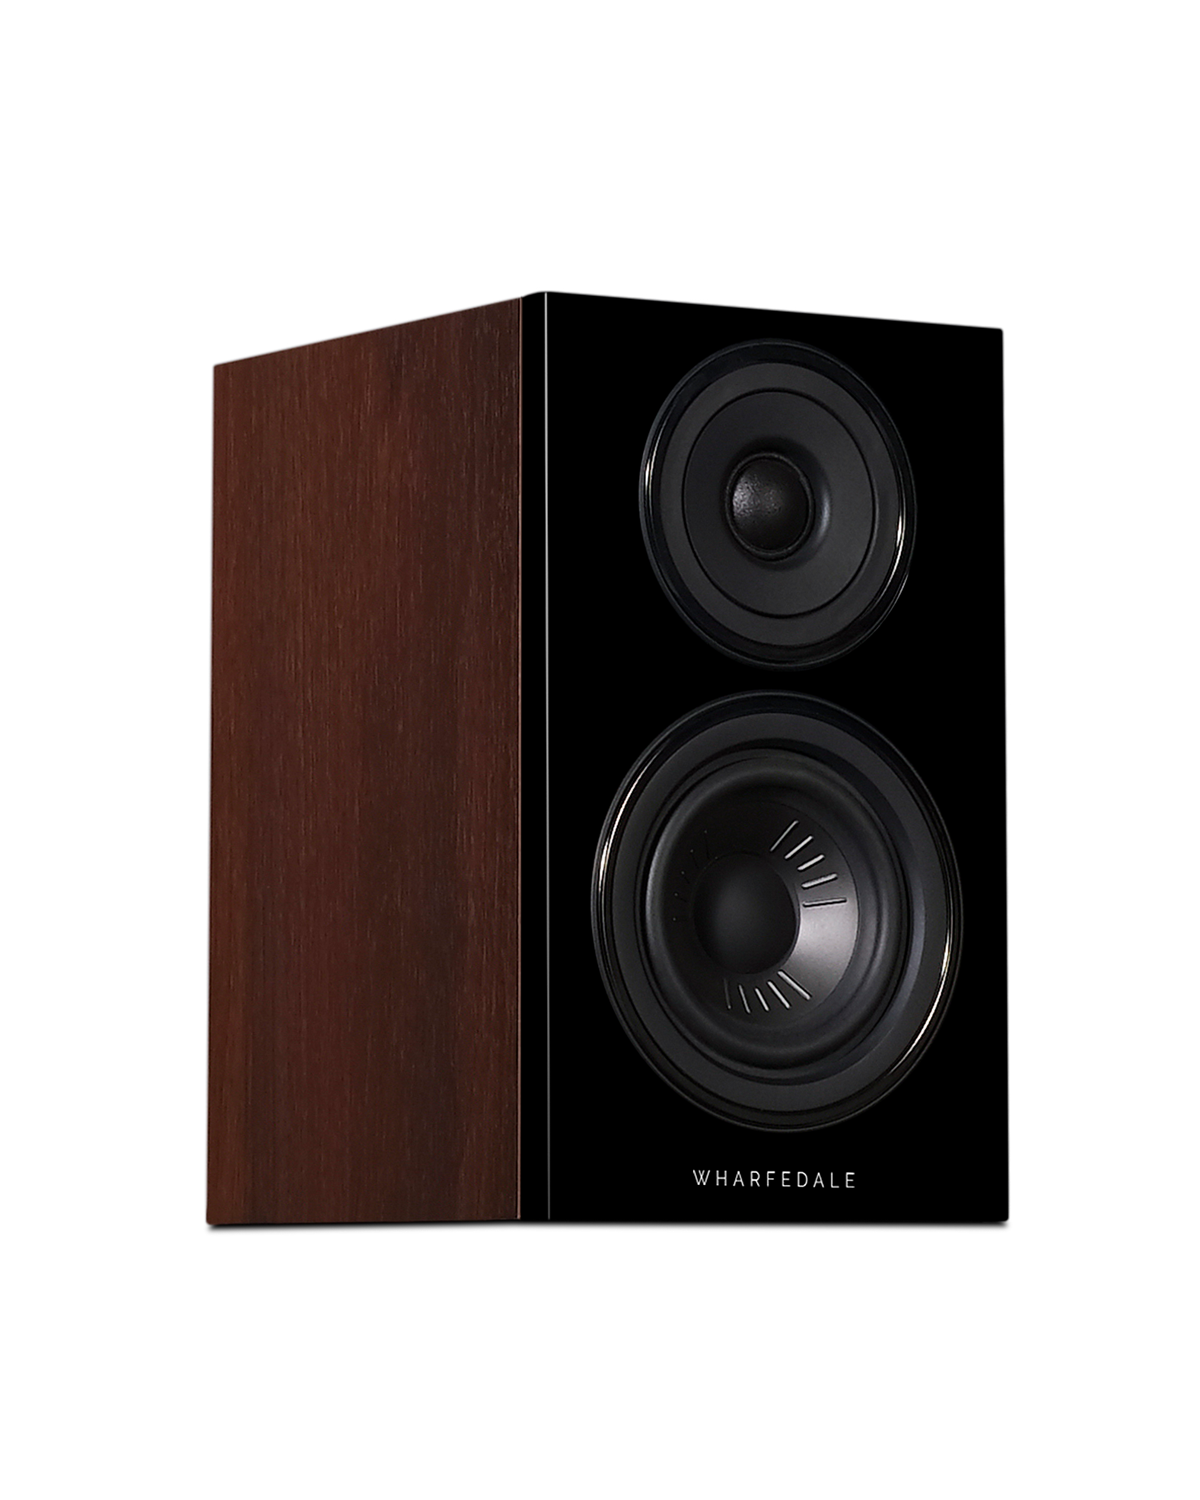 The true all-rounder, the Wharfedale DIAMOND 12.1 is a traditional standmount (or bookshelf) speaker that embodies the history and performance values of the Wharfedale DIAMOND series. The perfect ‘affordable’ hi-fi speaker, the DIAMOND 12.1 offers the best of both worlds – compact size with power and detail.